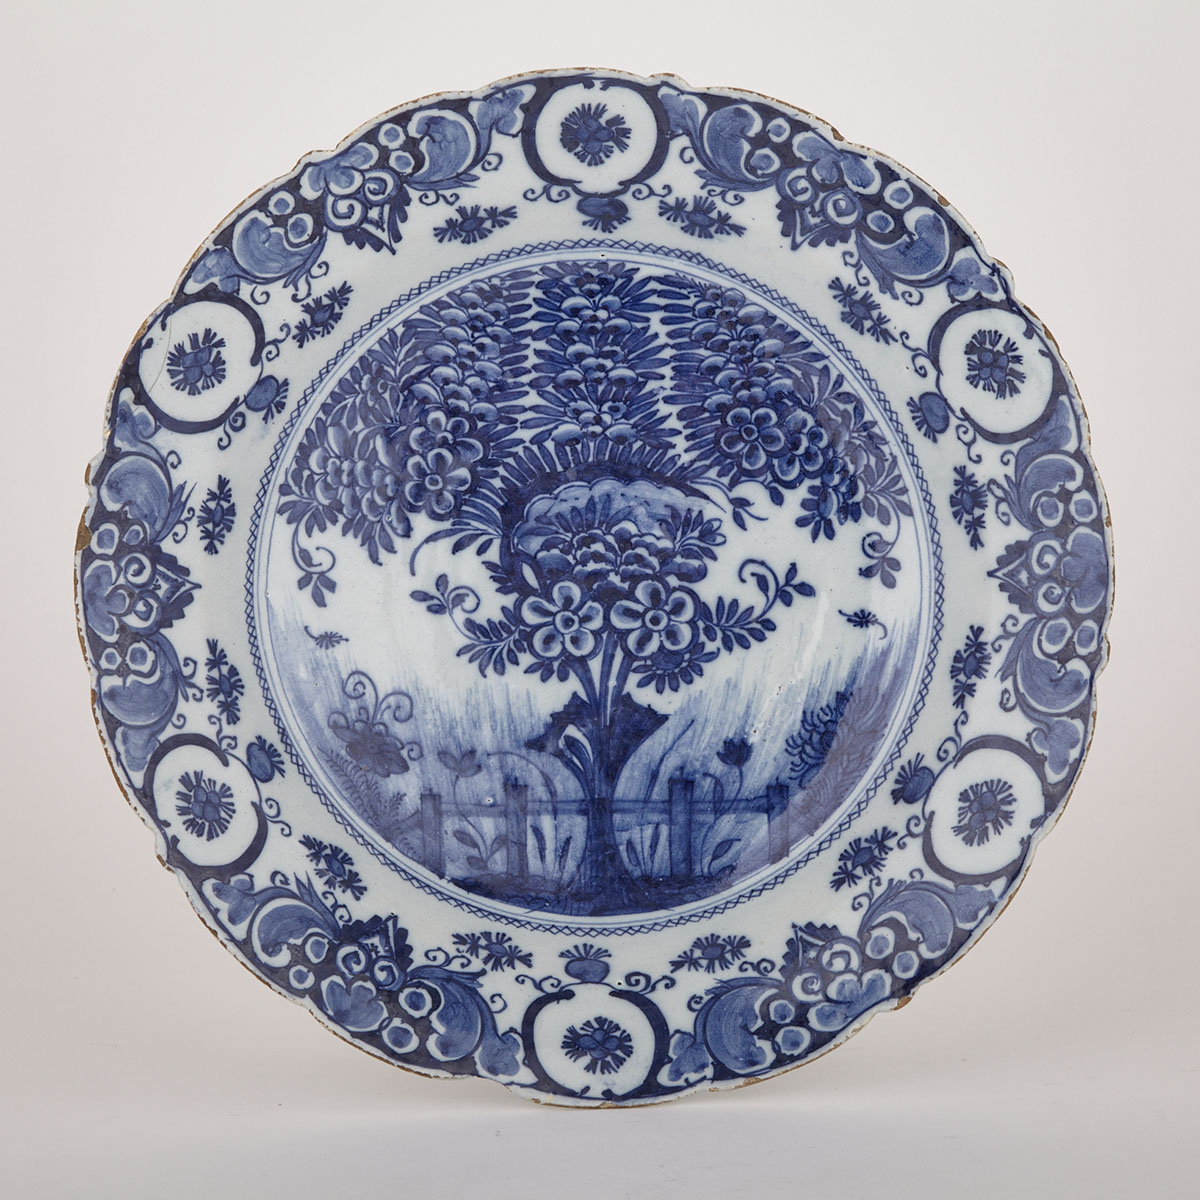 Dutch Delft Blue and White Tea Tree Charger, 18th century